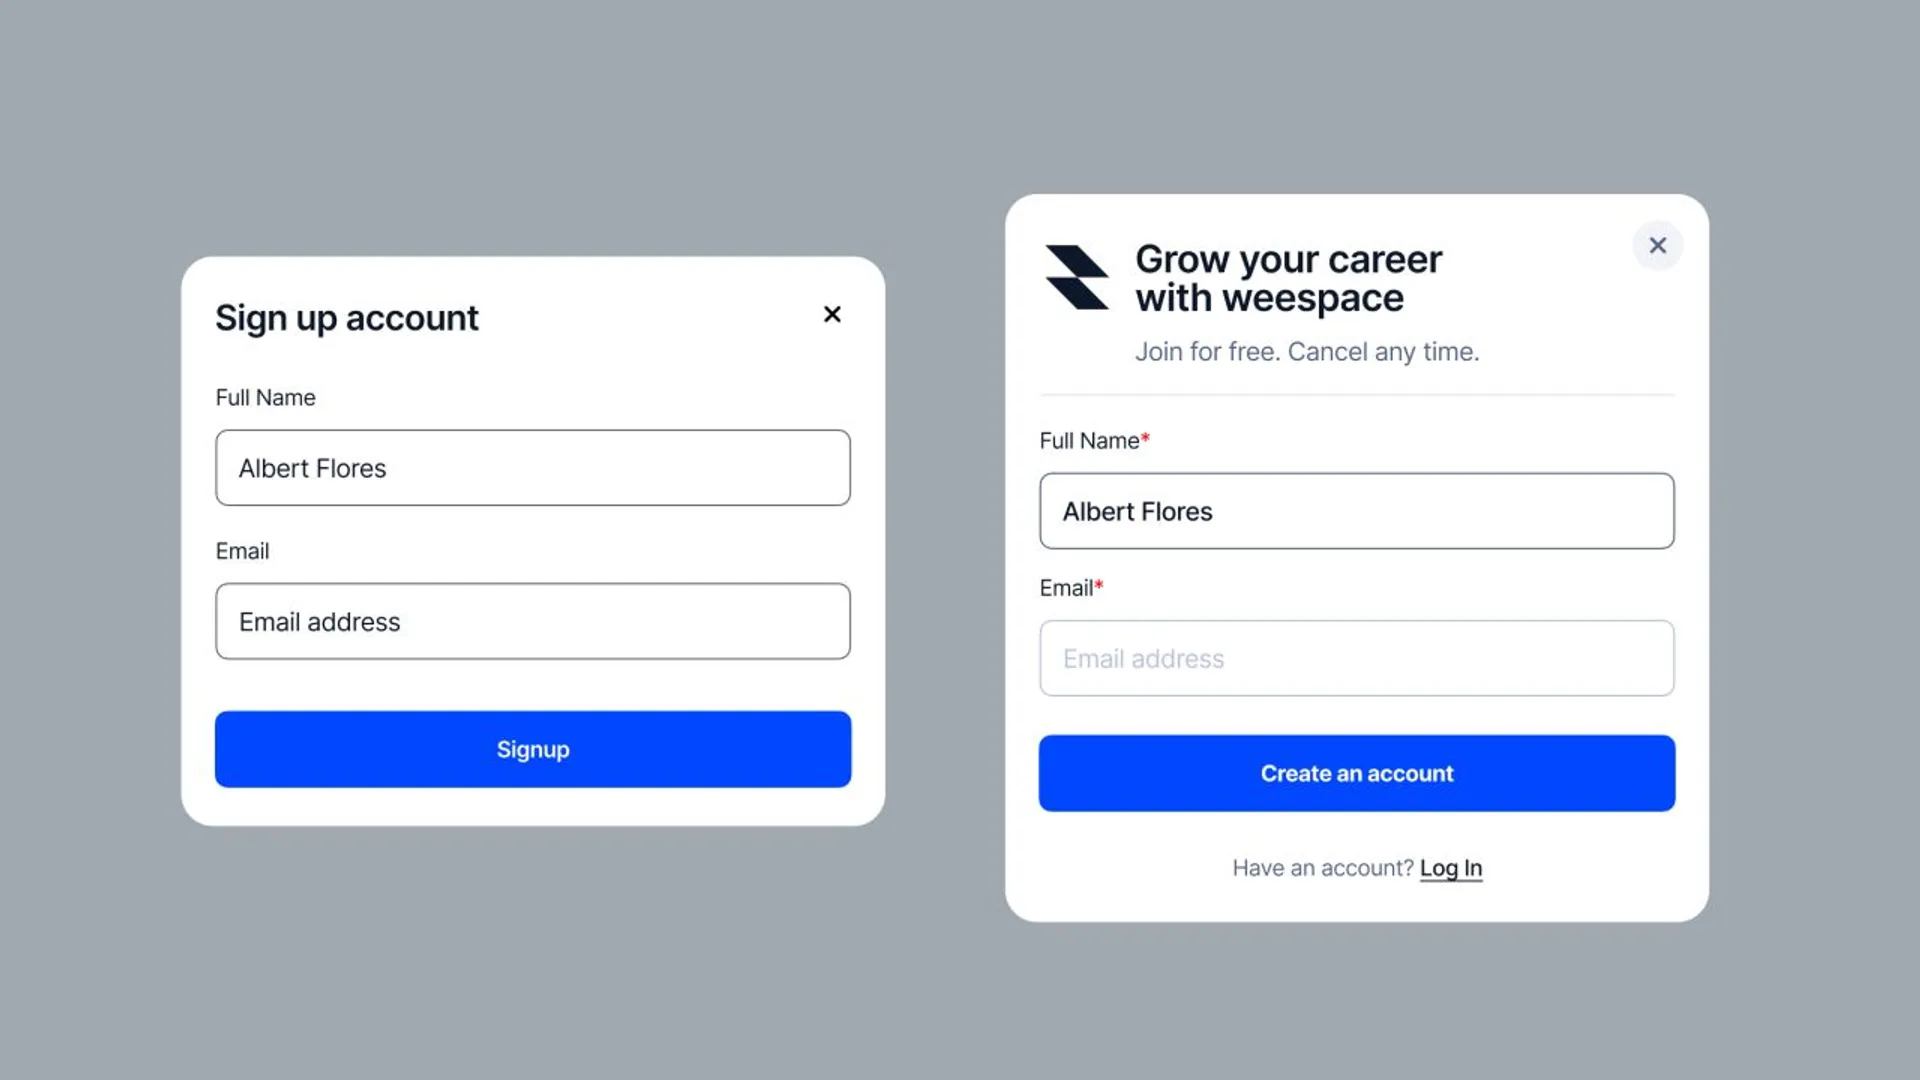 Design — Before and after
Small improvements can make a big difference in design:

— Provide clear context
— Write better design Copy
— Play typeface style and colors
— Emphasis on what is most important